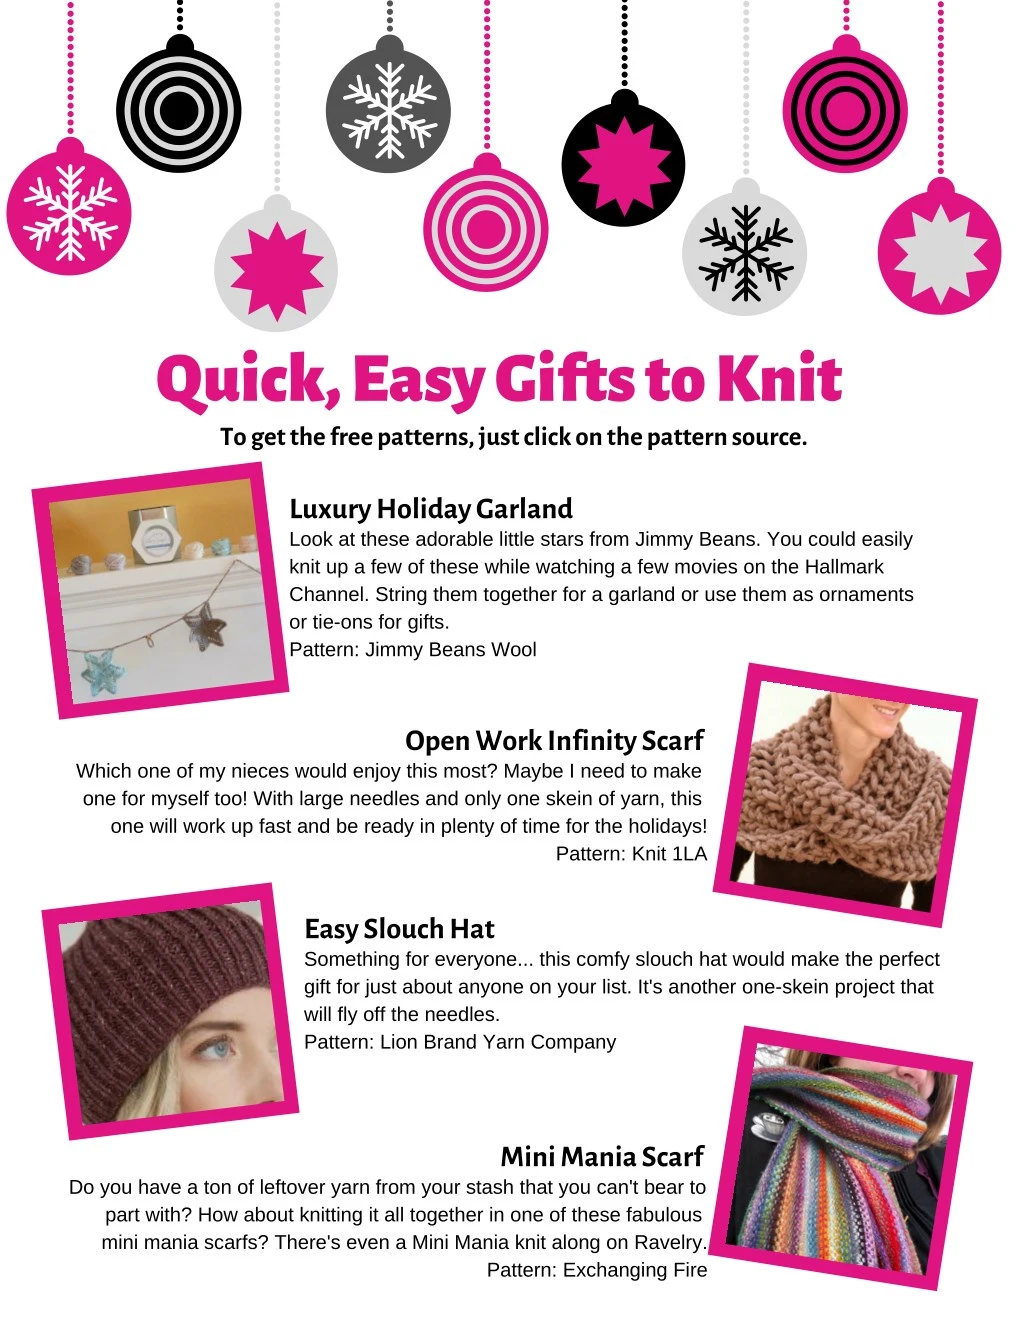 quick easy gifts to knit to get the free patterns